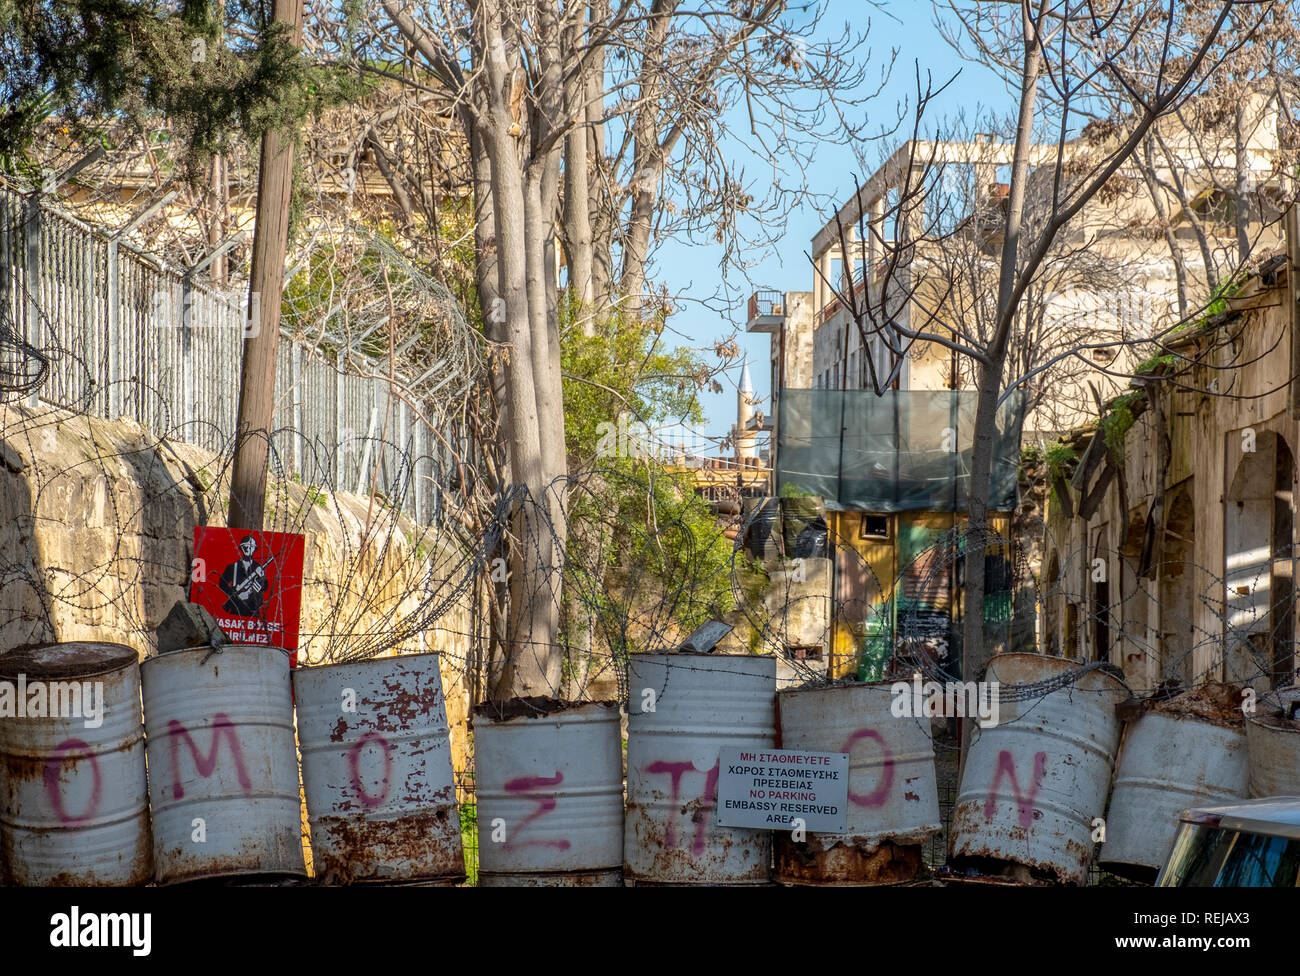 A barrier across a street in the centre of Nicosia, Cyprus which marks the buffer zone between the Turkish and Greek Cypriot sides of the divided city Stock Photo